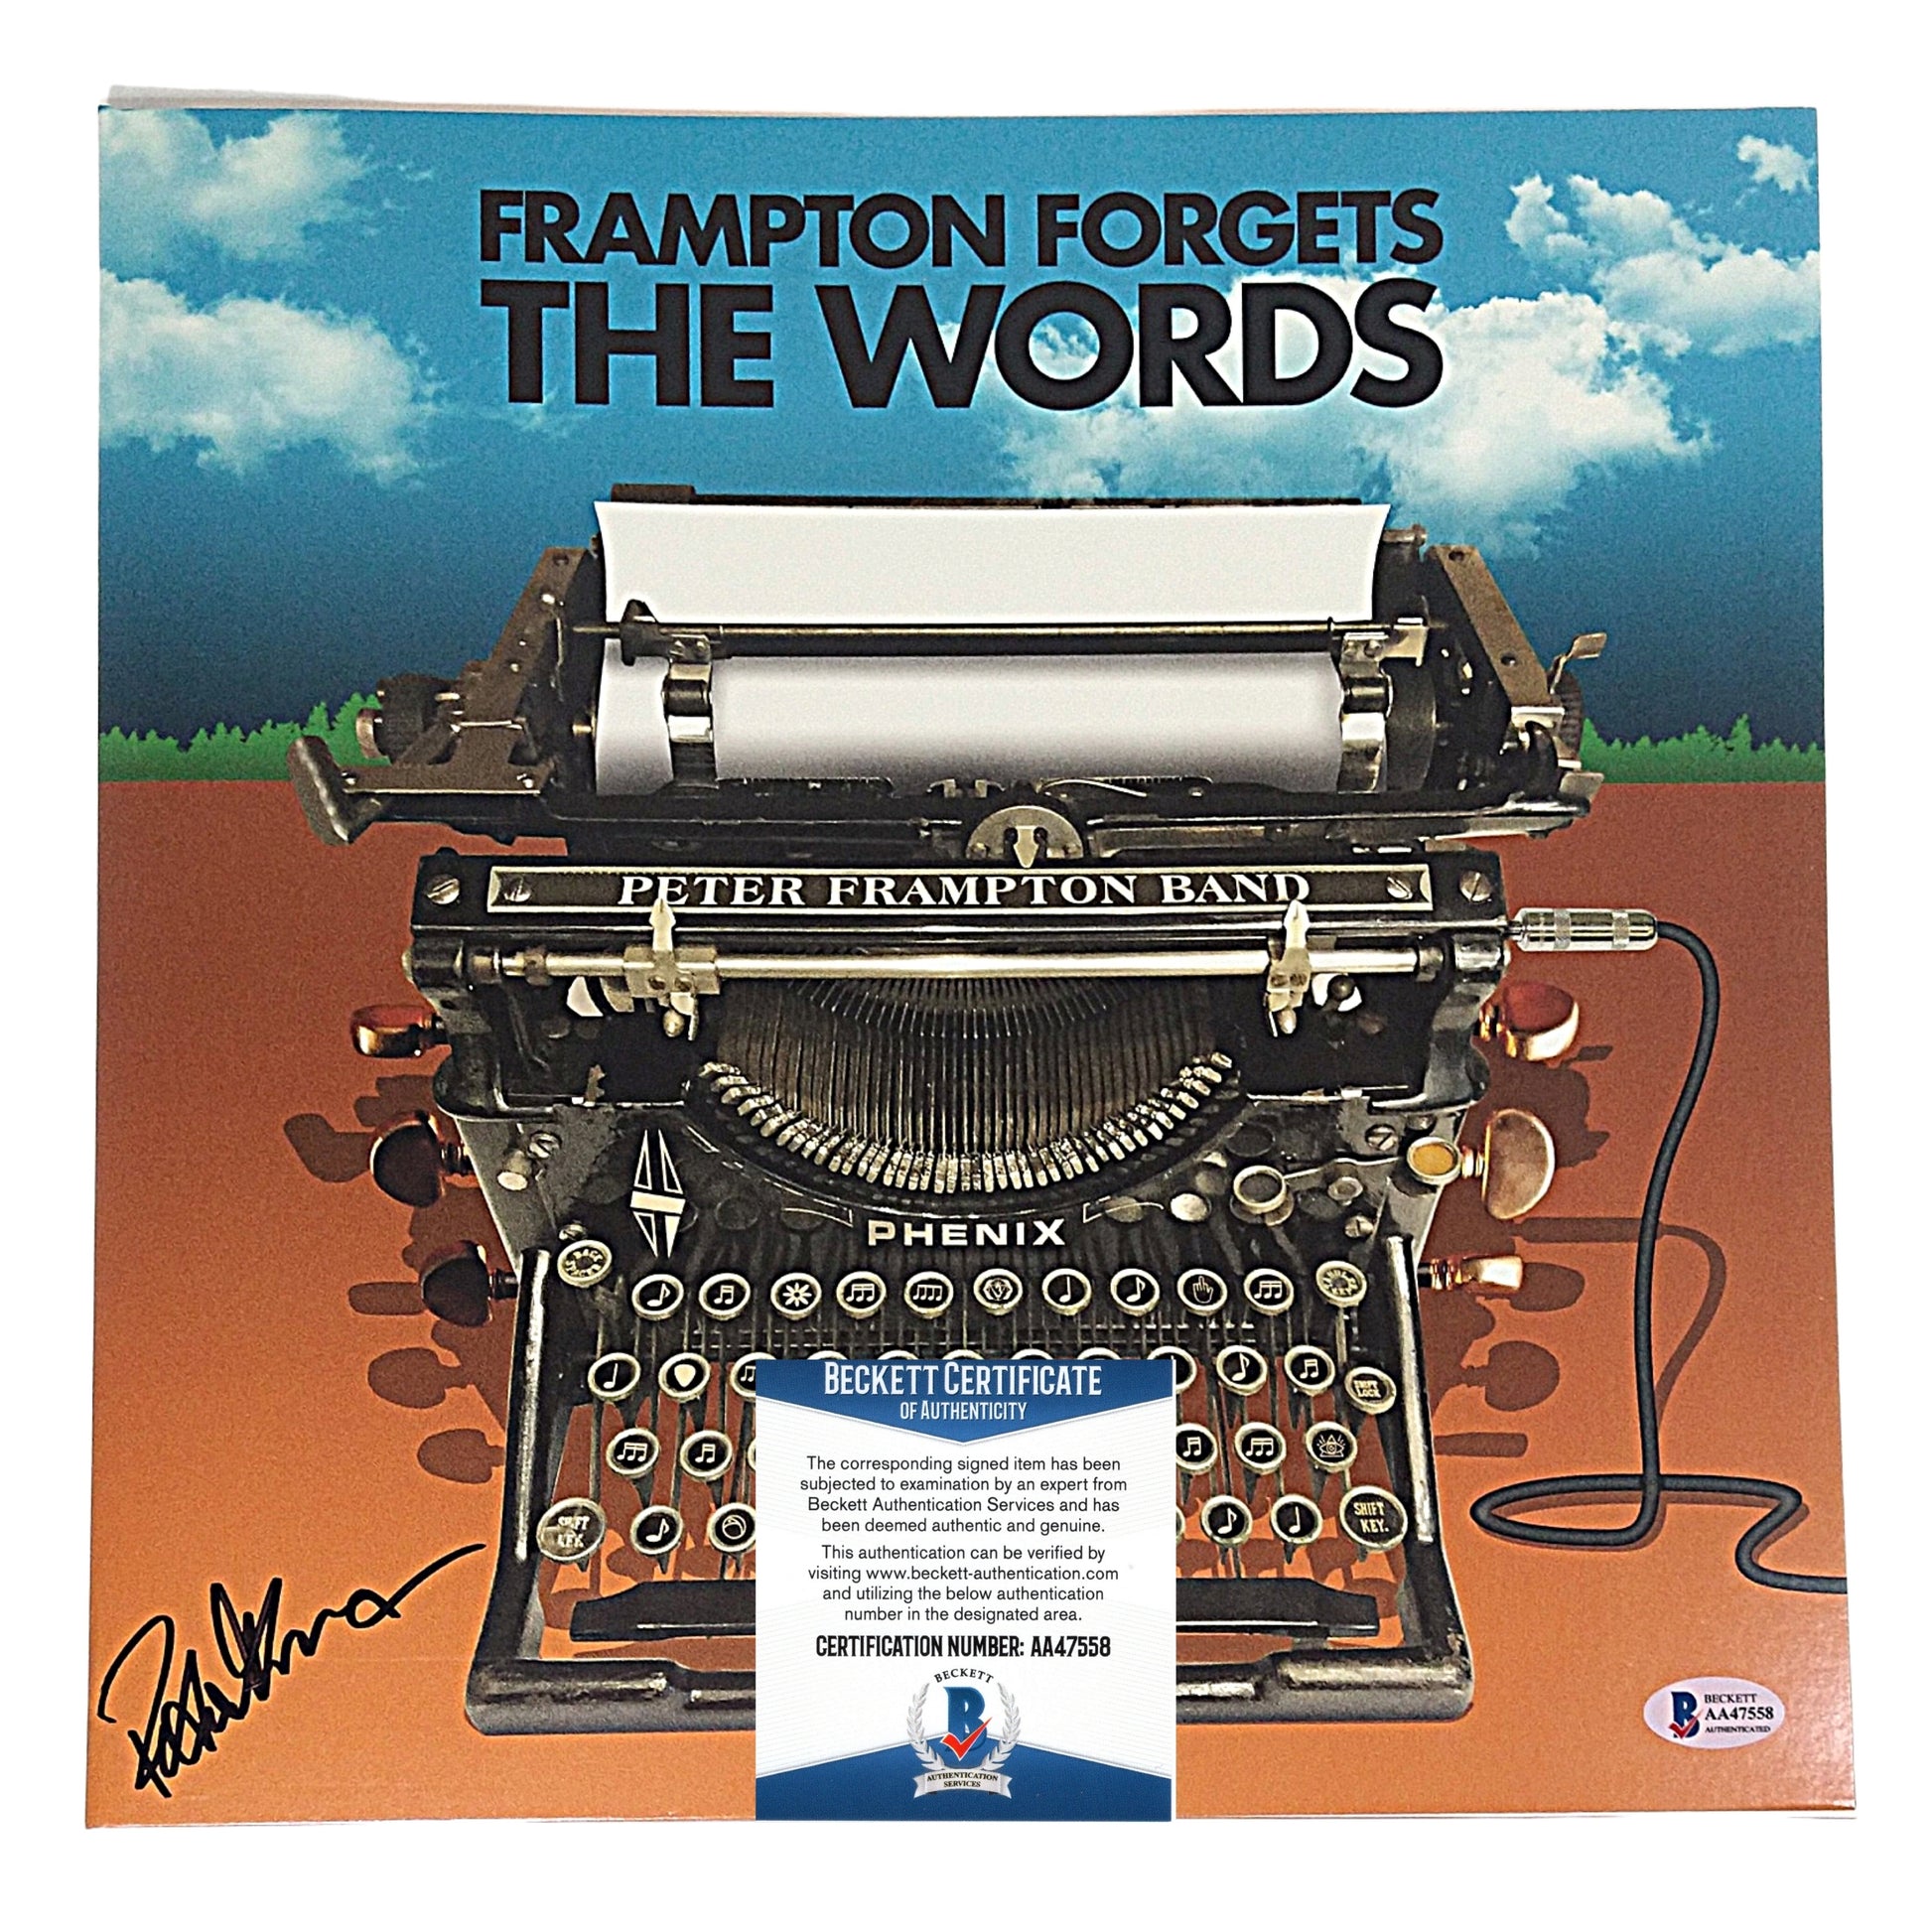 Music- Autographed- Peter Frampton Signed Peter Frampton Forgets The Words Vinyl Record Album Cover Bundled with Brand-New Sealed Album Beckett BAS Authentication 102